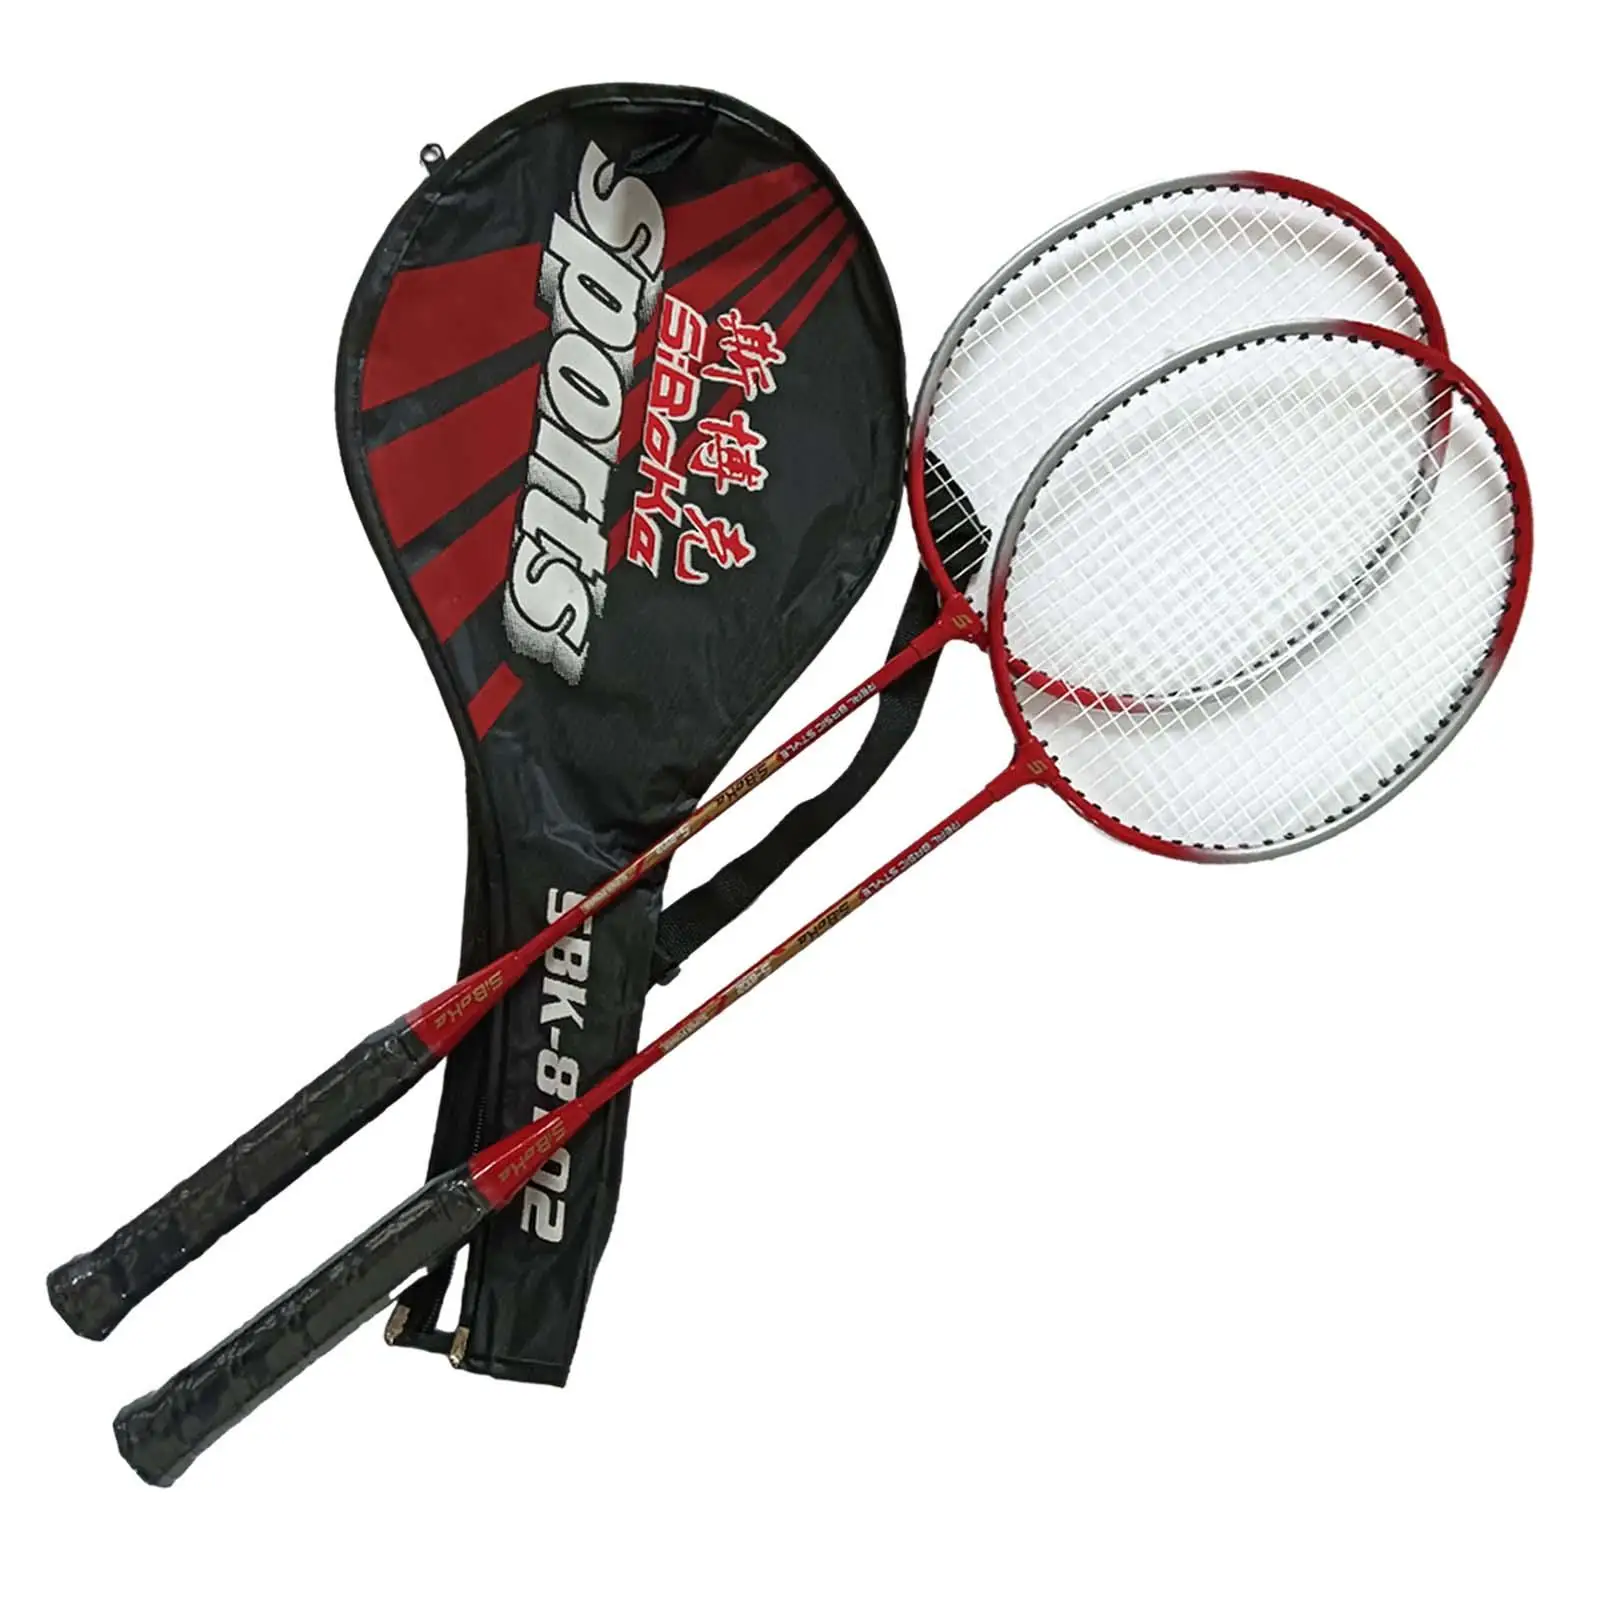 2x Badminton Racquet Set Professional Badminton Rackets with Carry Bag for